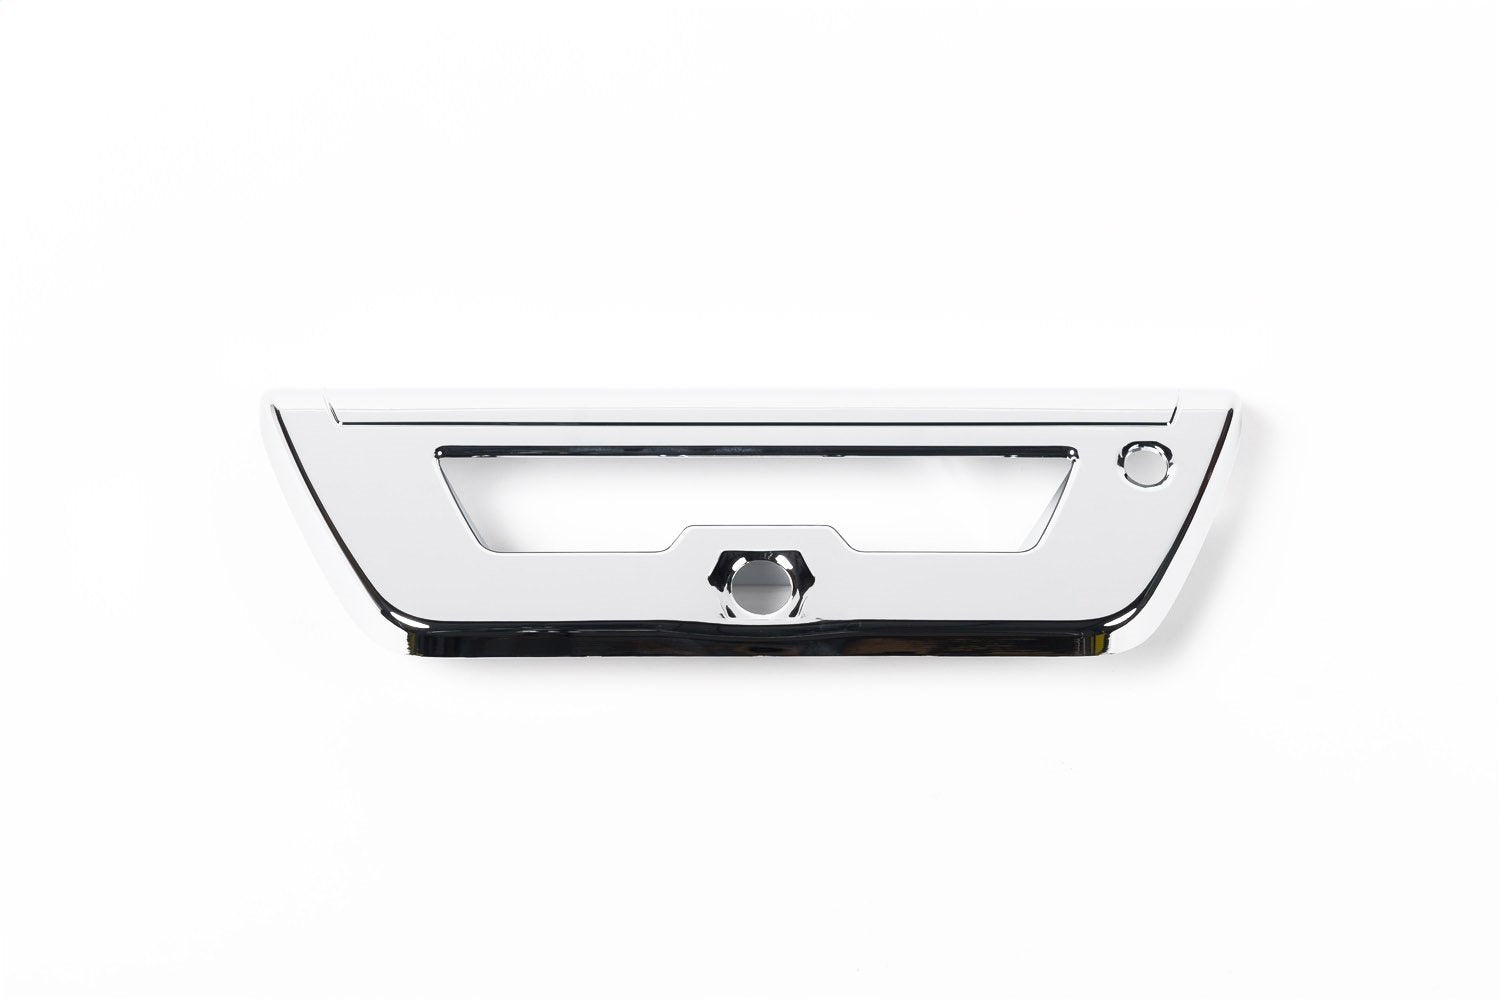 Putco 401069 Tailgate Handle Cover For Ford F-150, Chrome